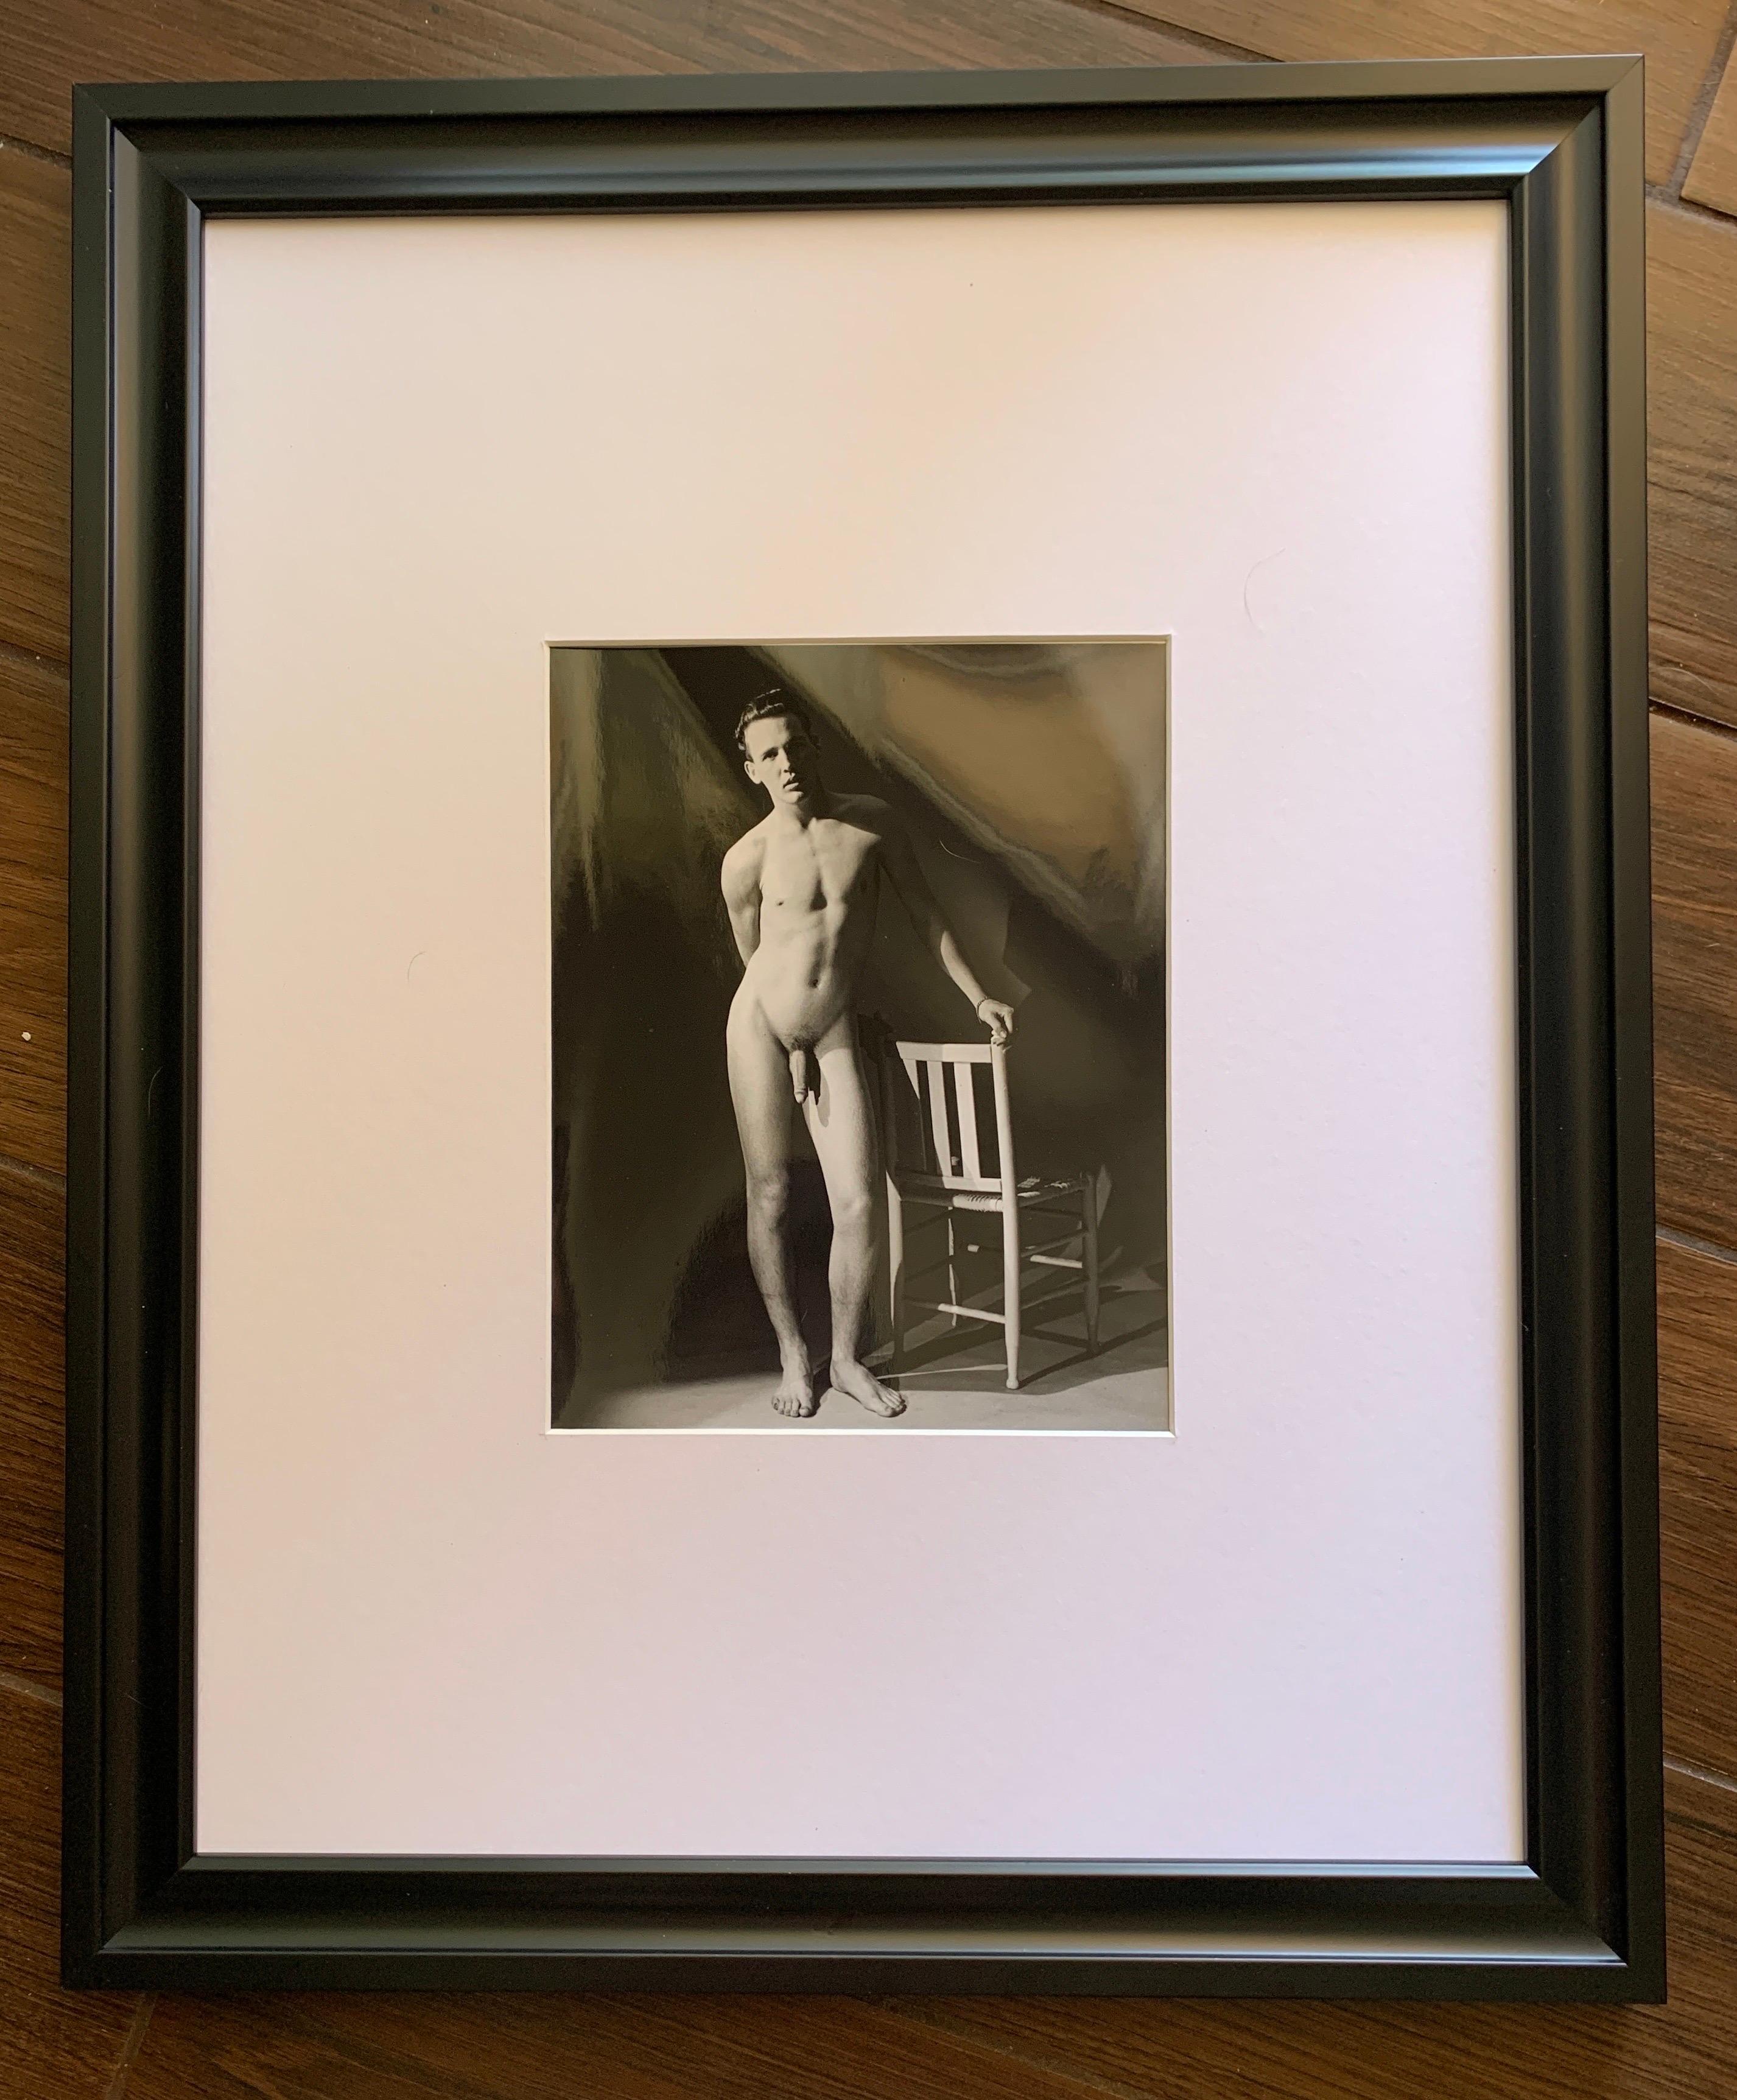 A rare collection of original black and white photographs purchased in 1996 that were printed in 1996. They were custom ordered and only maximum of 3 were made. The photographs are beautifully printed. Pat Milo was a “artistic” male nude/physique